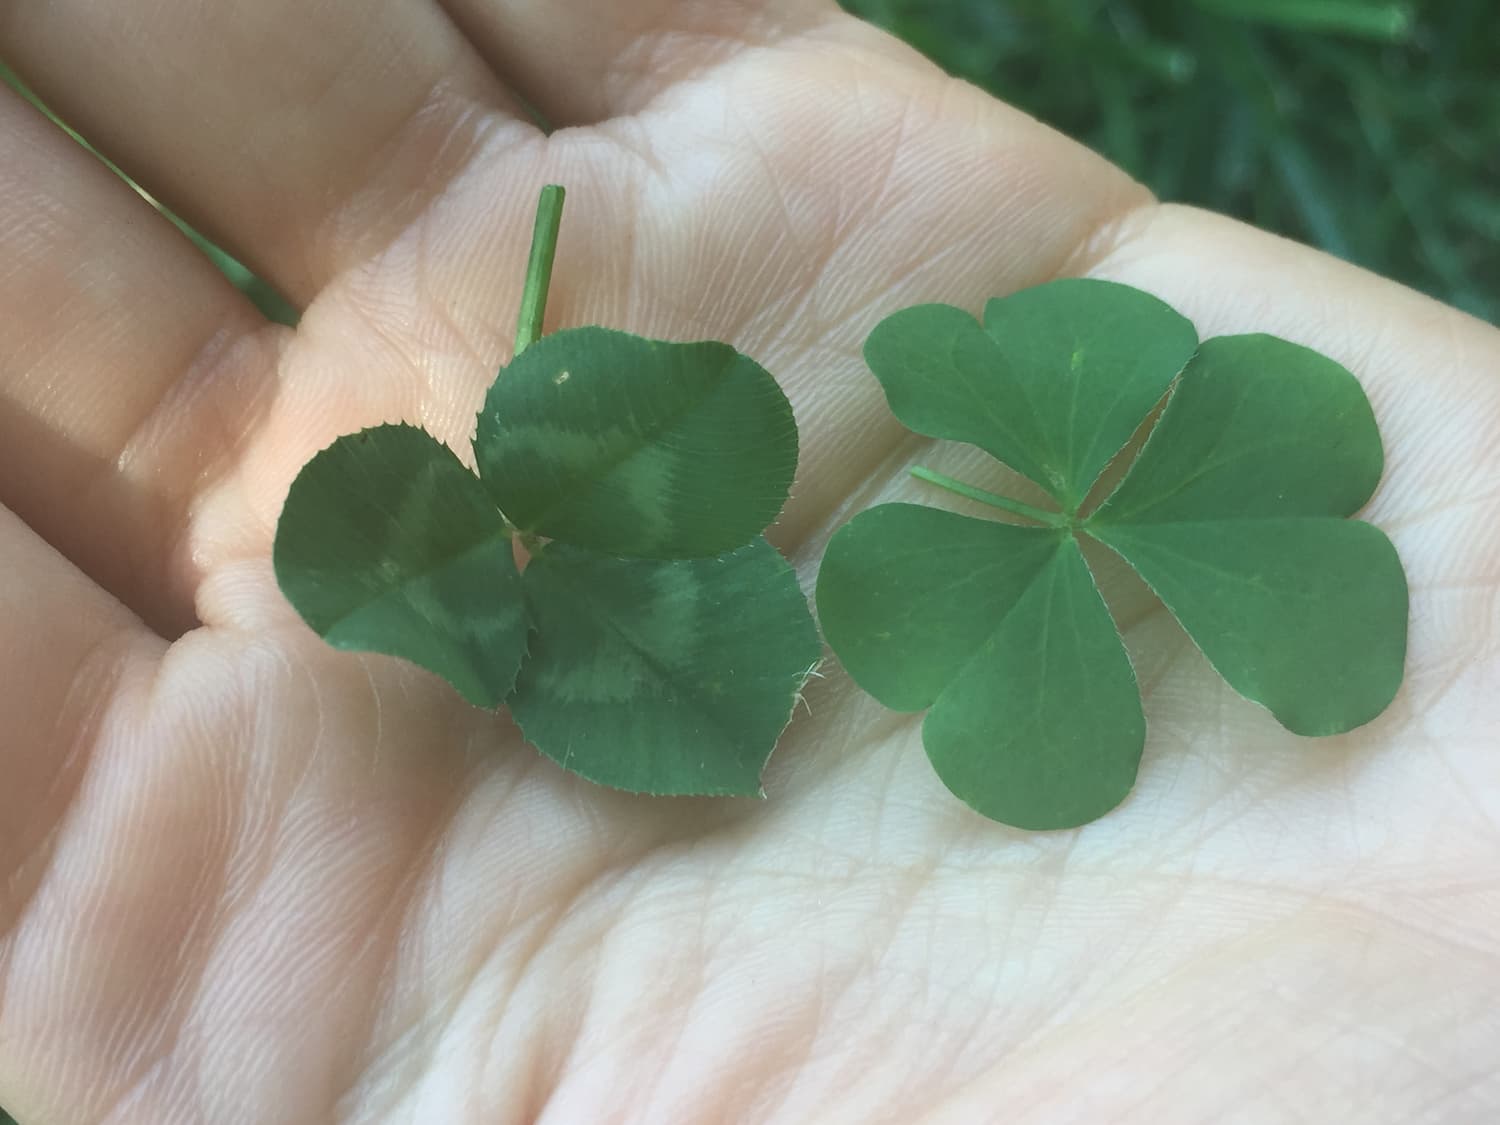 Clover left, wood sorrel right. If they're tough to tell apart, rest assured that they're both edible.